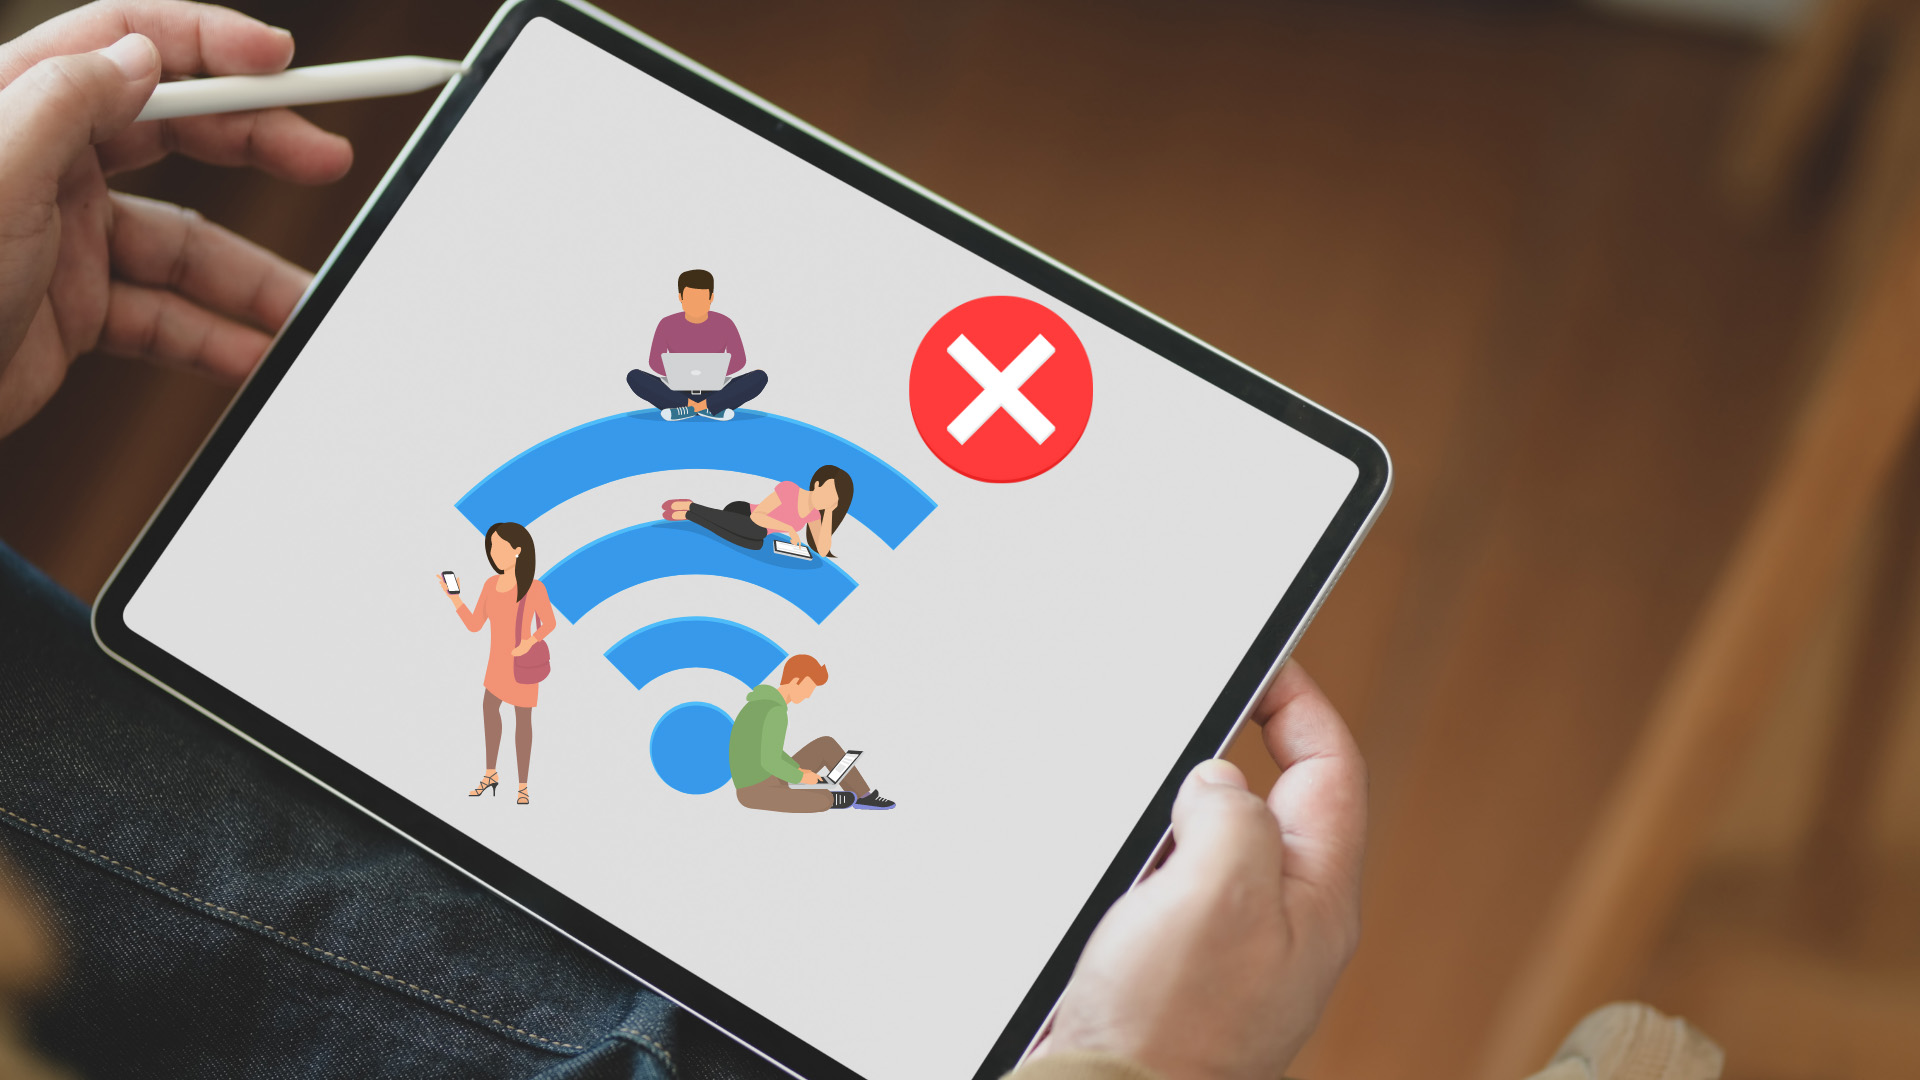 How To Use A Tablet Without Wi-Fi